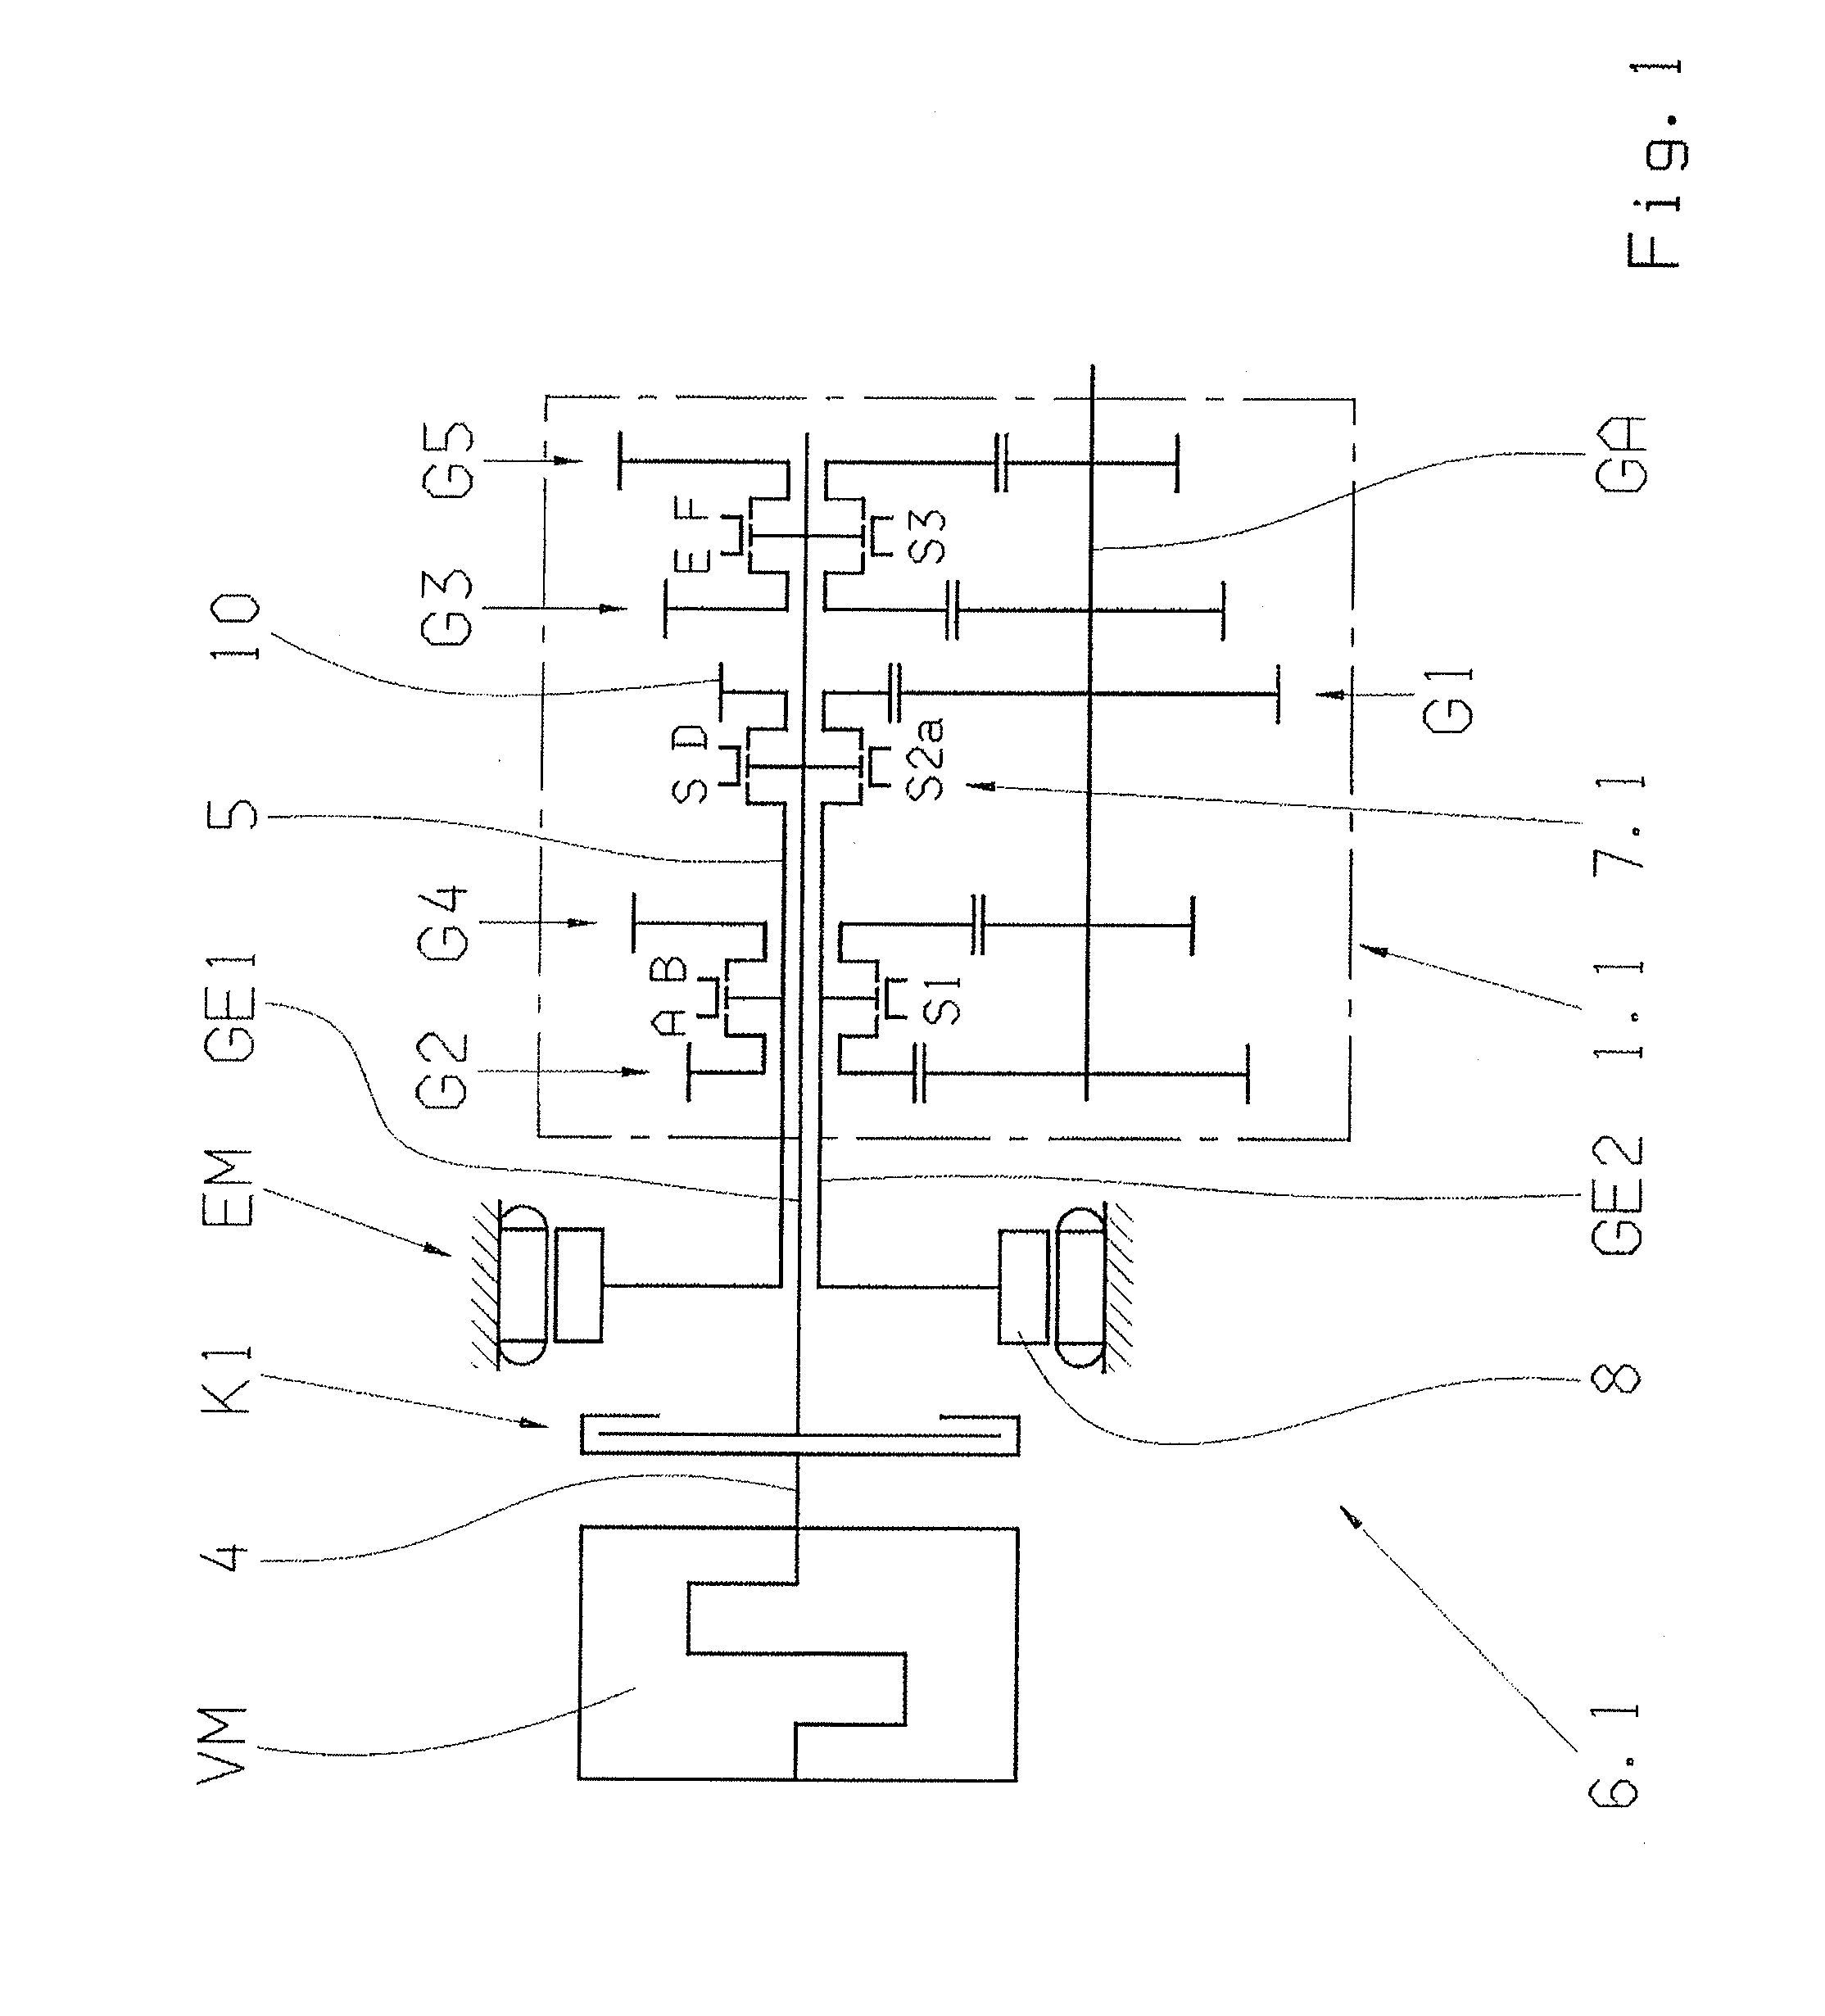 Manual transmission of a hybrid drive for a motor vehicle